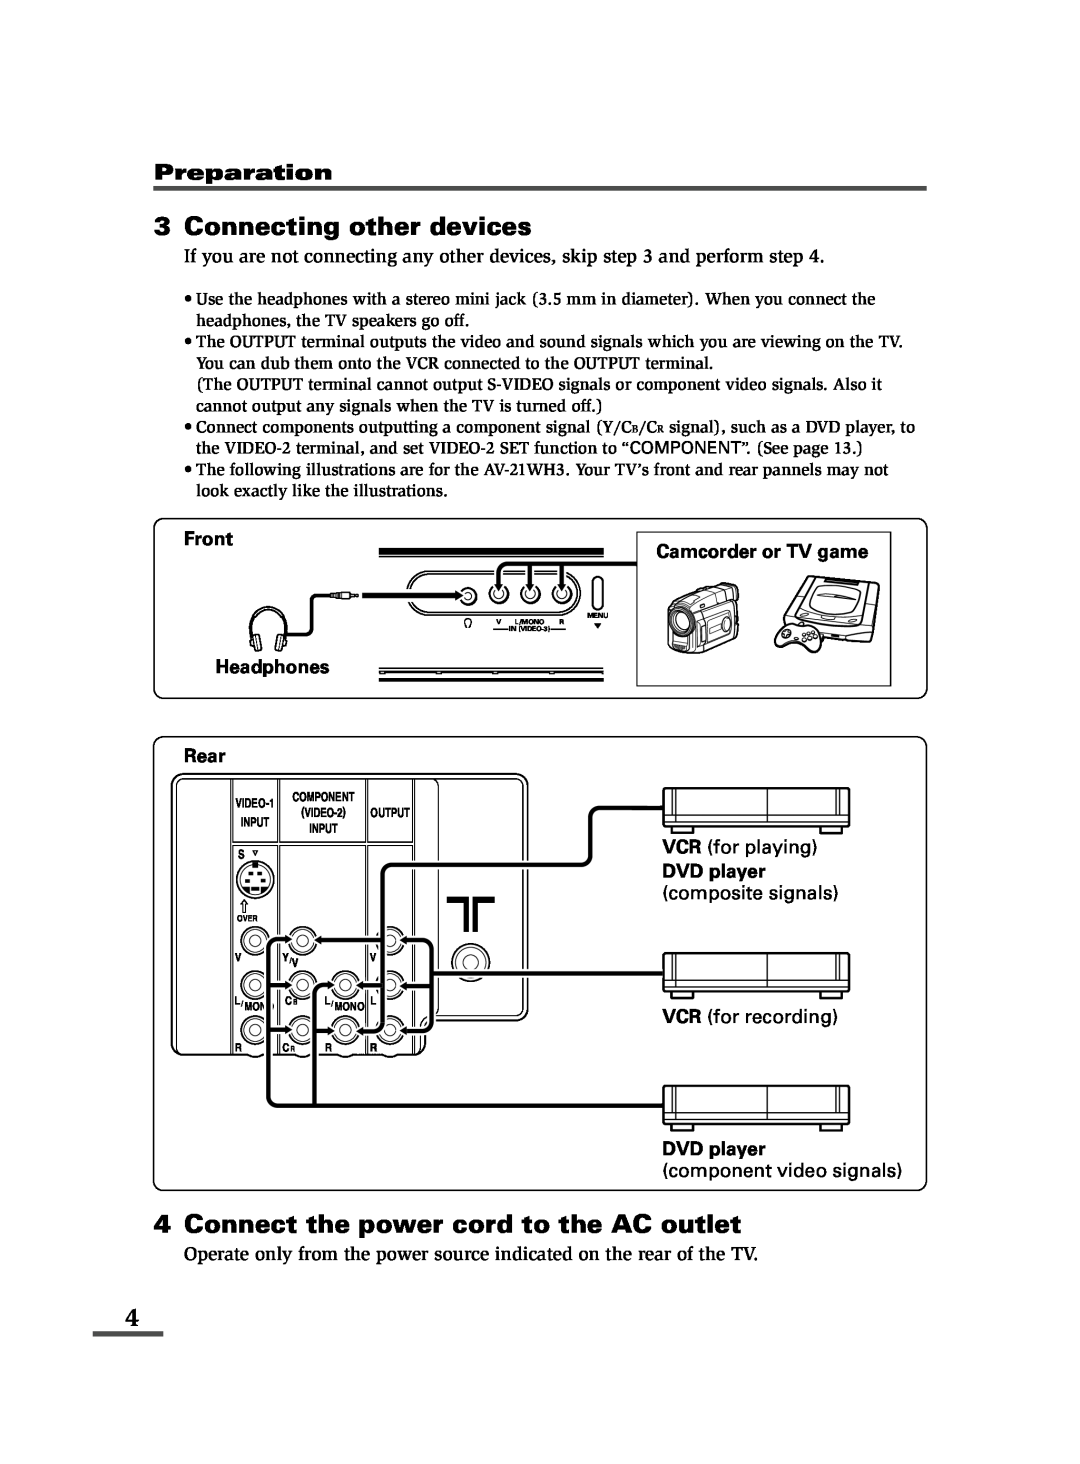 JVC specifications Connecting other devices, Connect the power cord to the AC outlet, Preparation, Input 